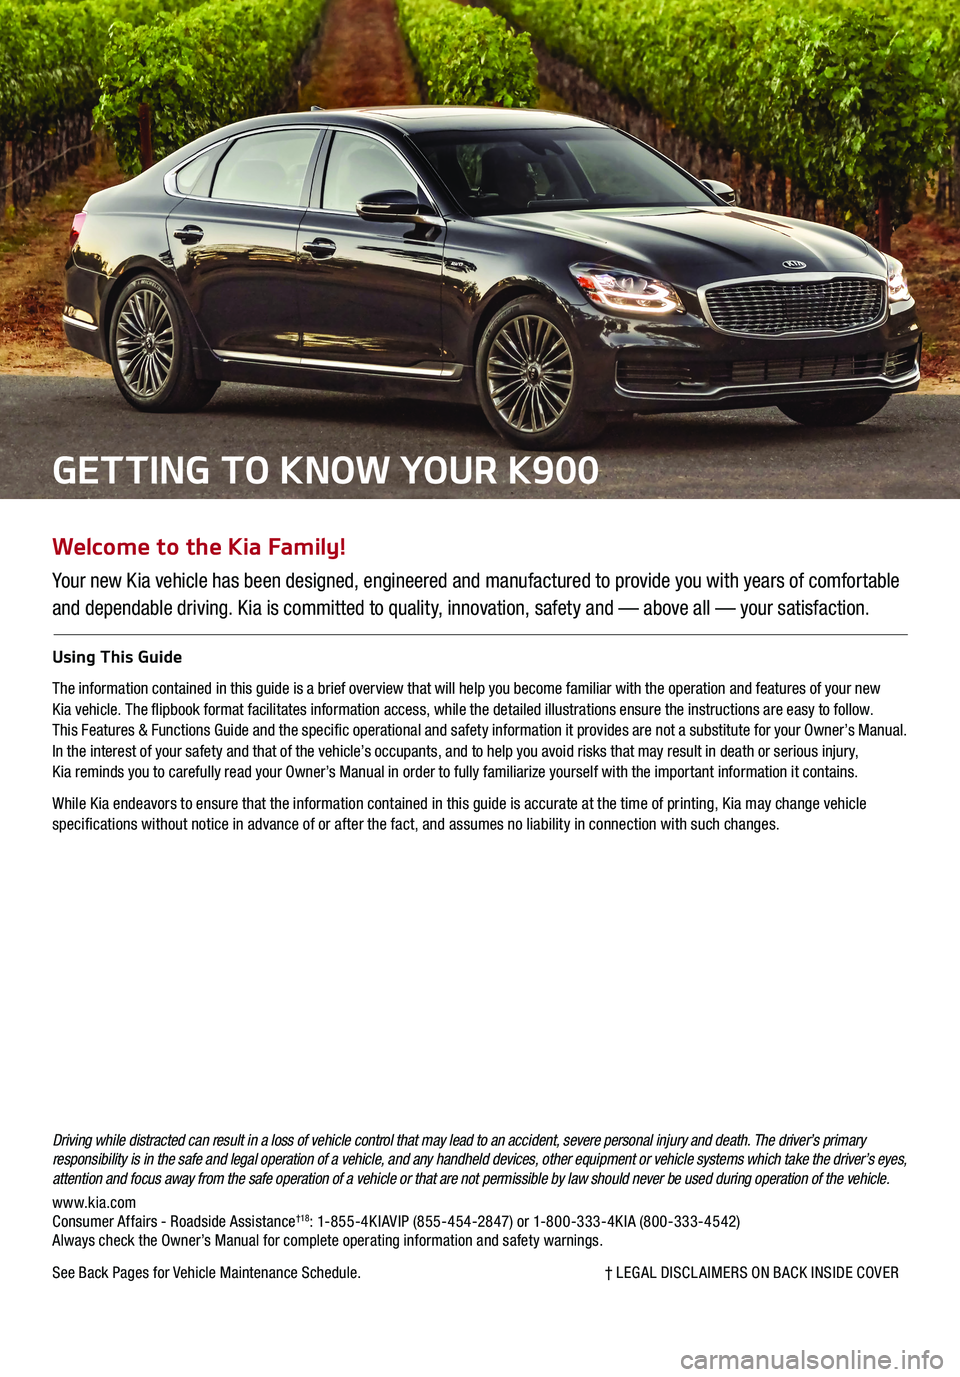 KIA K900 2020  Features and Functions Guide Welcome to the Kia Family!
Your new Kia vehicle has been designed, engineered and manufactured to provide you with years of comfortable 
and dependable driving. Kia is committed to quality, innovation